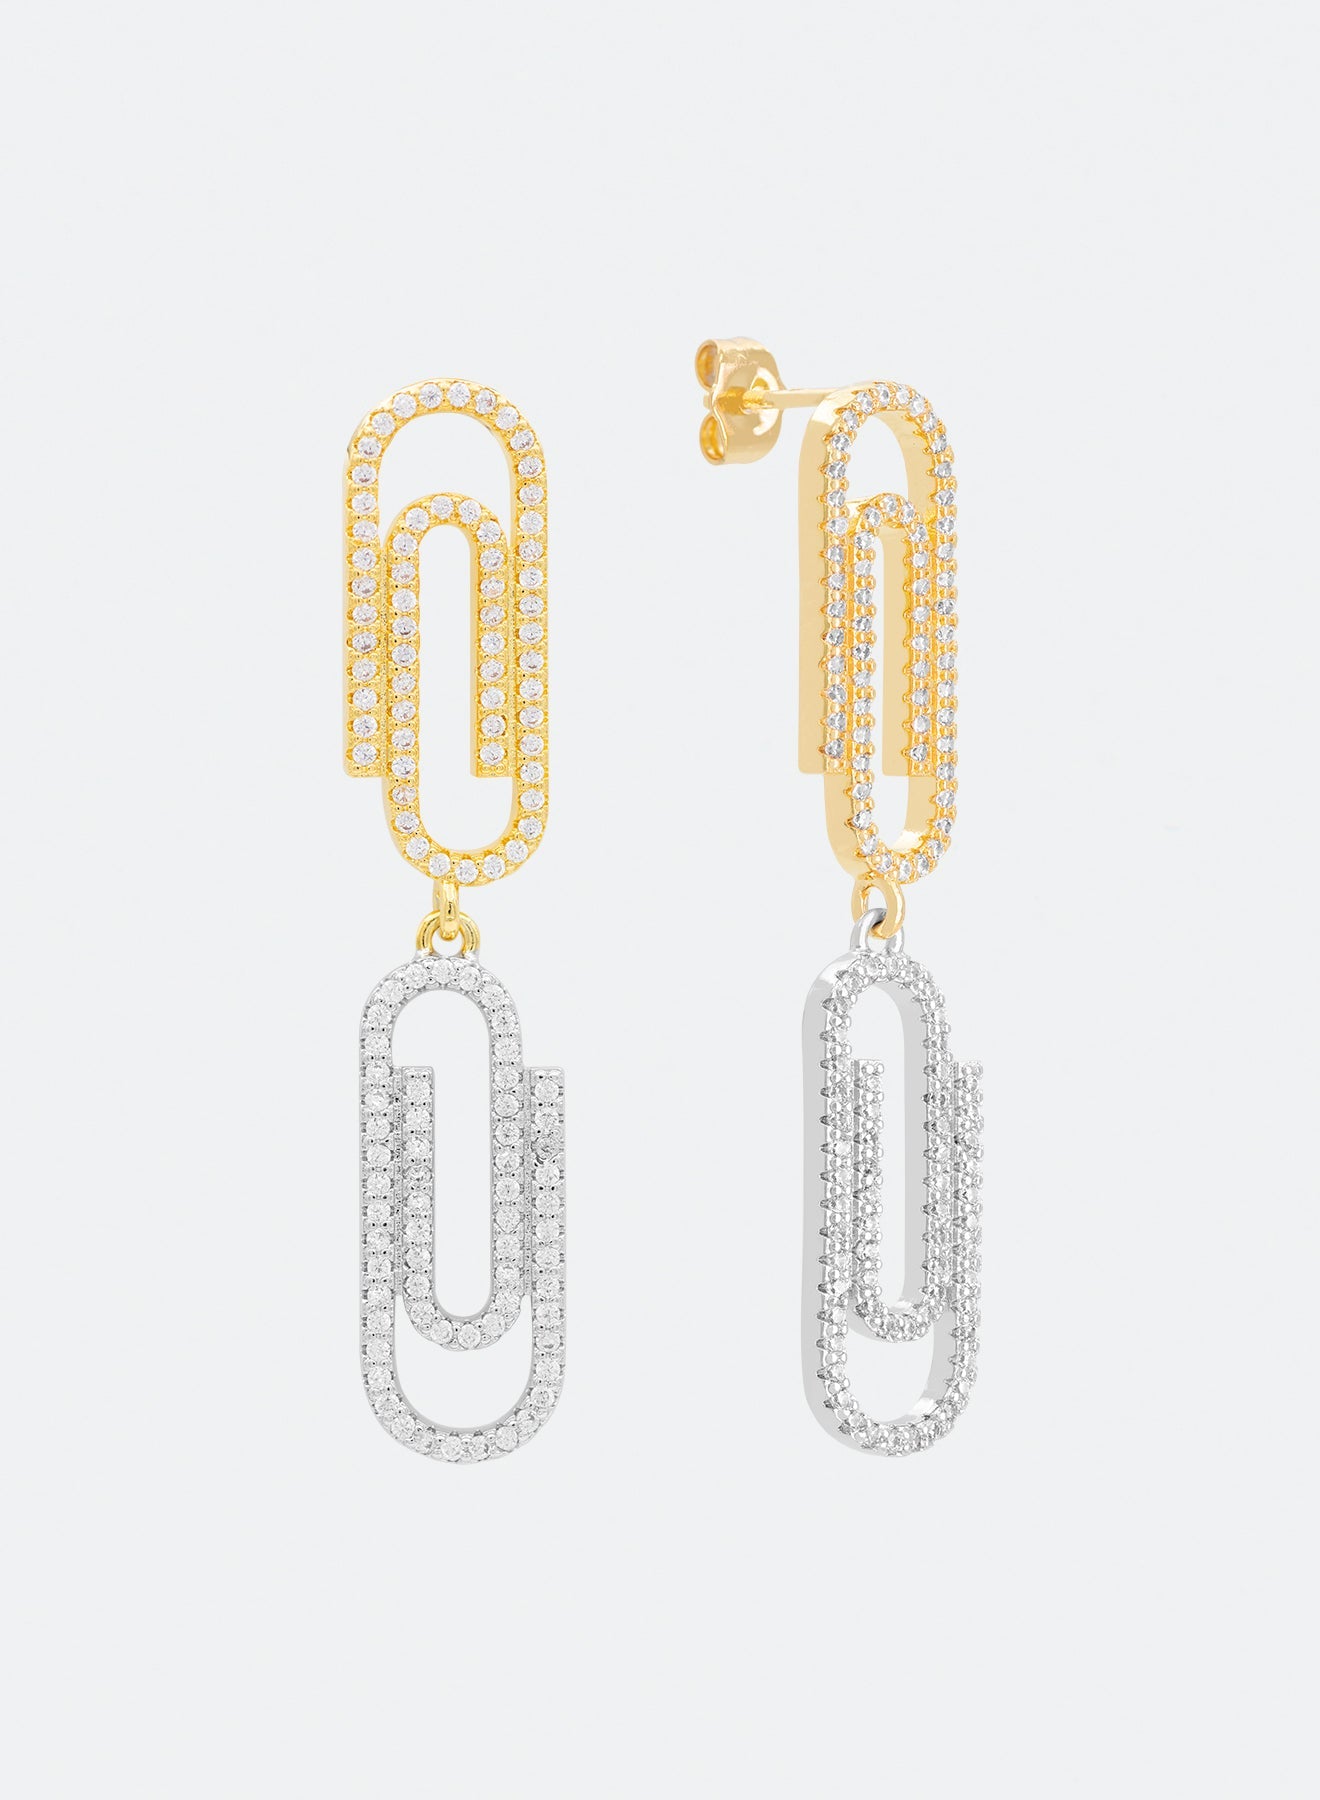 18k yellow and white gold coated paperclip earrings with hand-set micropavé stones in white on constrasting asymmetrcial links